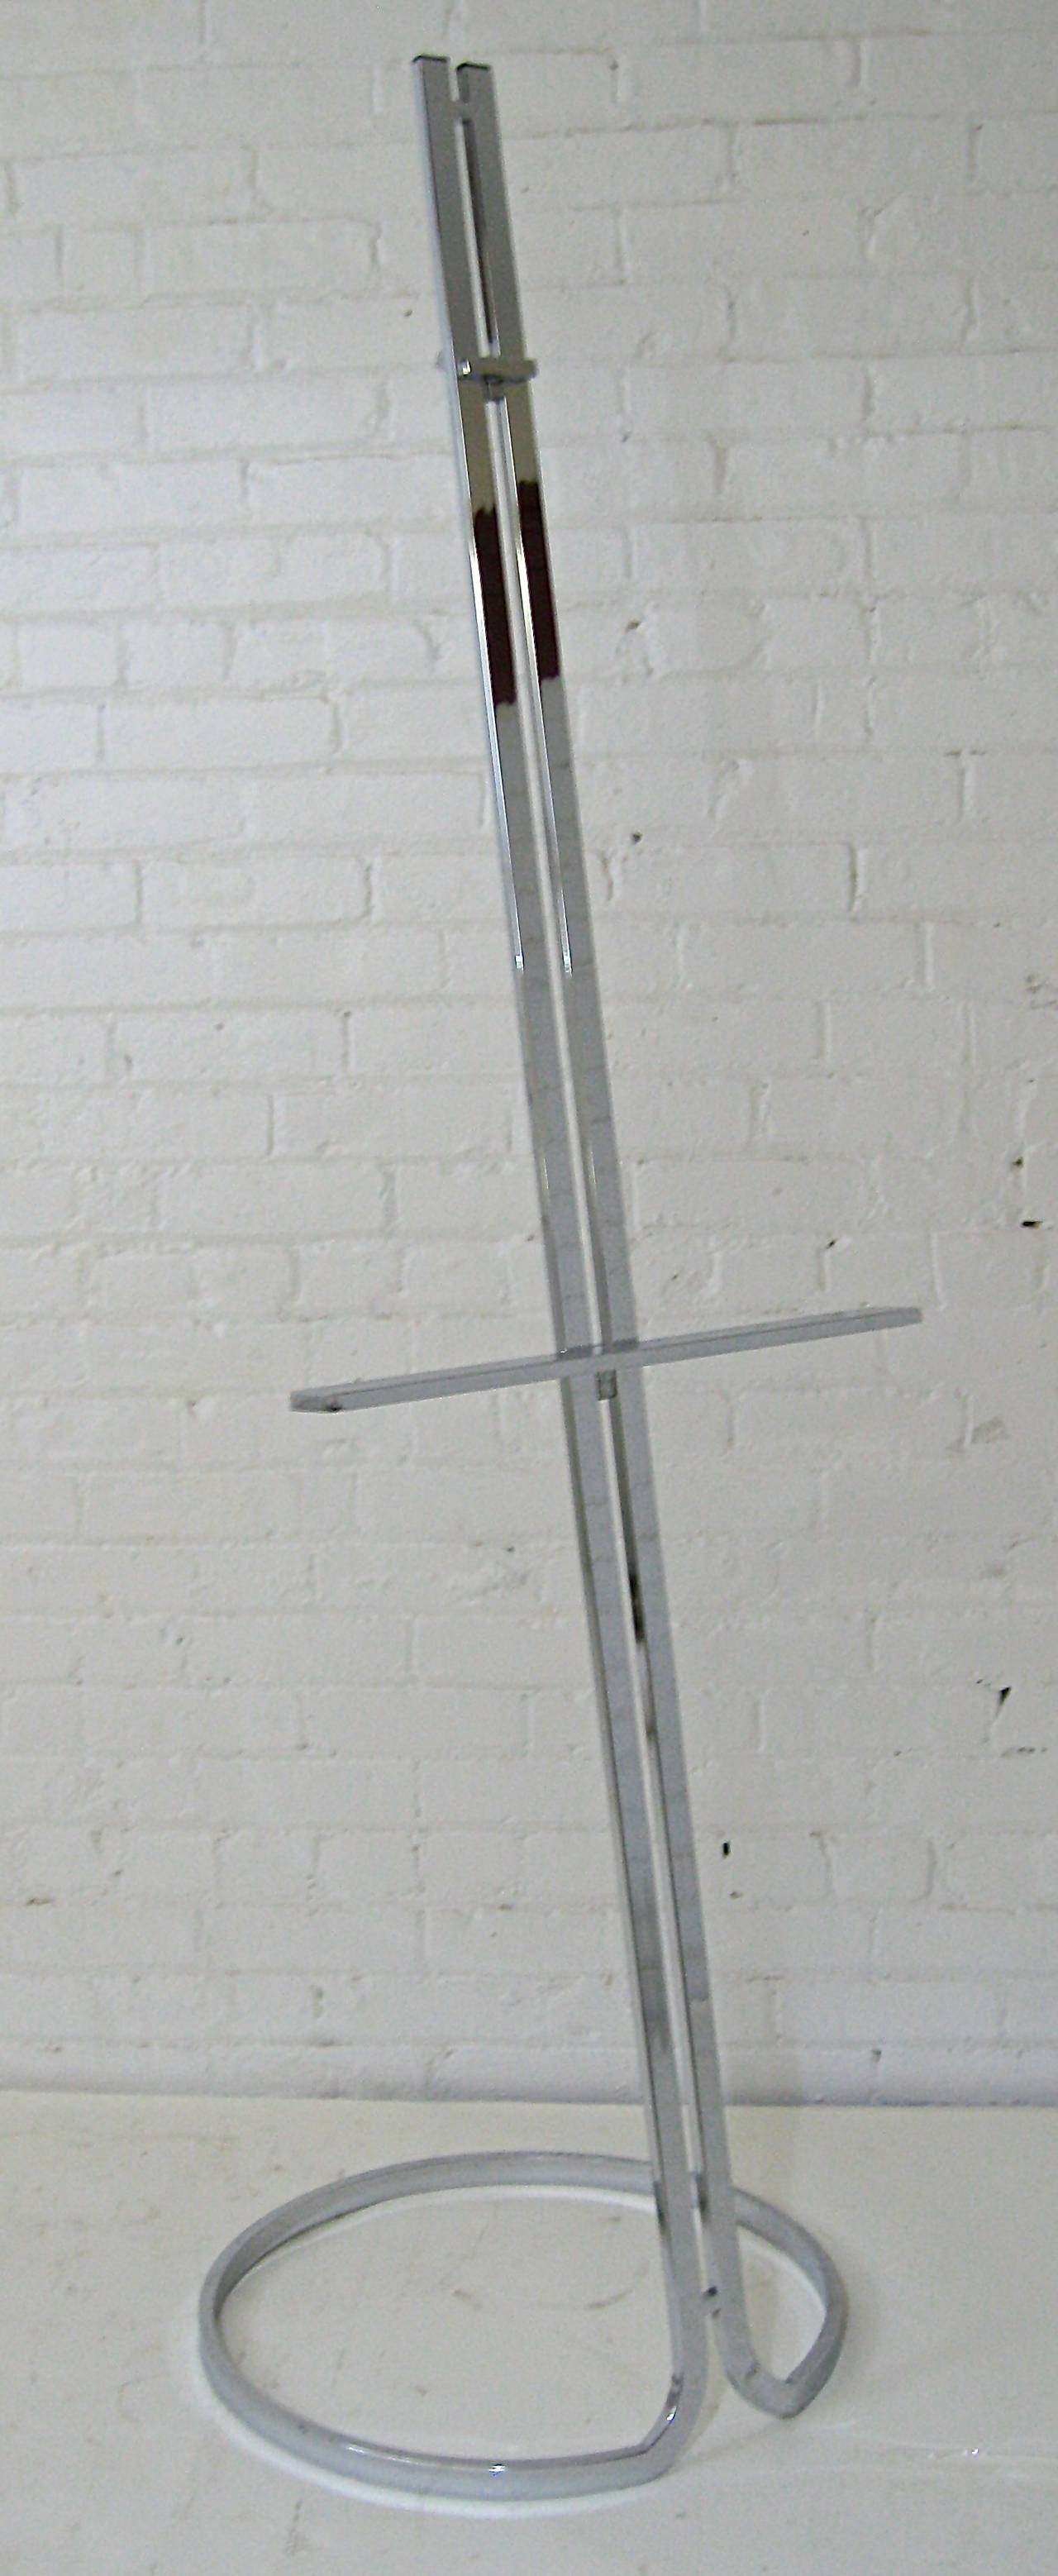 Very sexy circa 1970s adjustable chrome easel attributed often to Milo Baughman. Excellent condition with some very minor scratches. Base measures 20